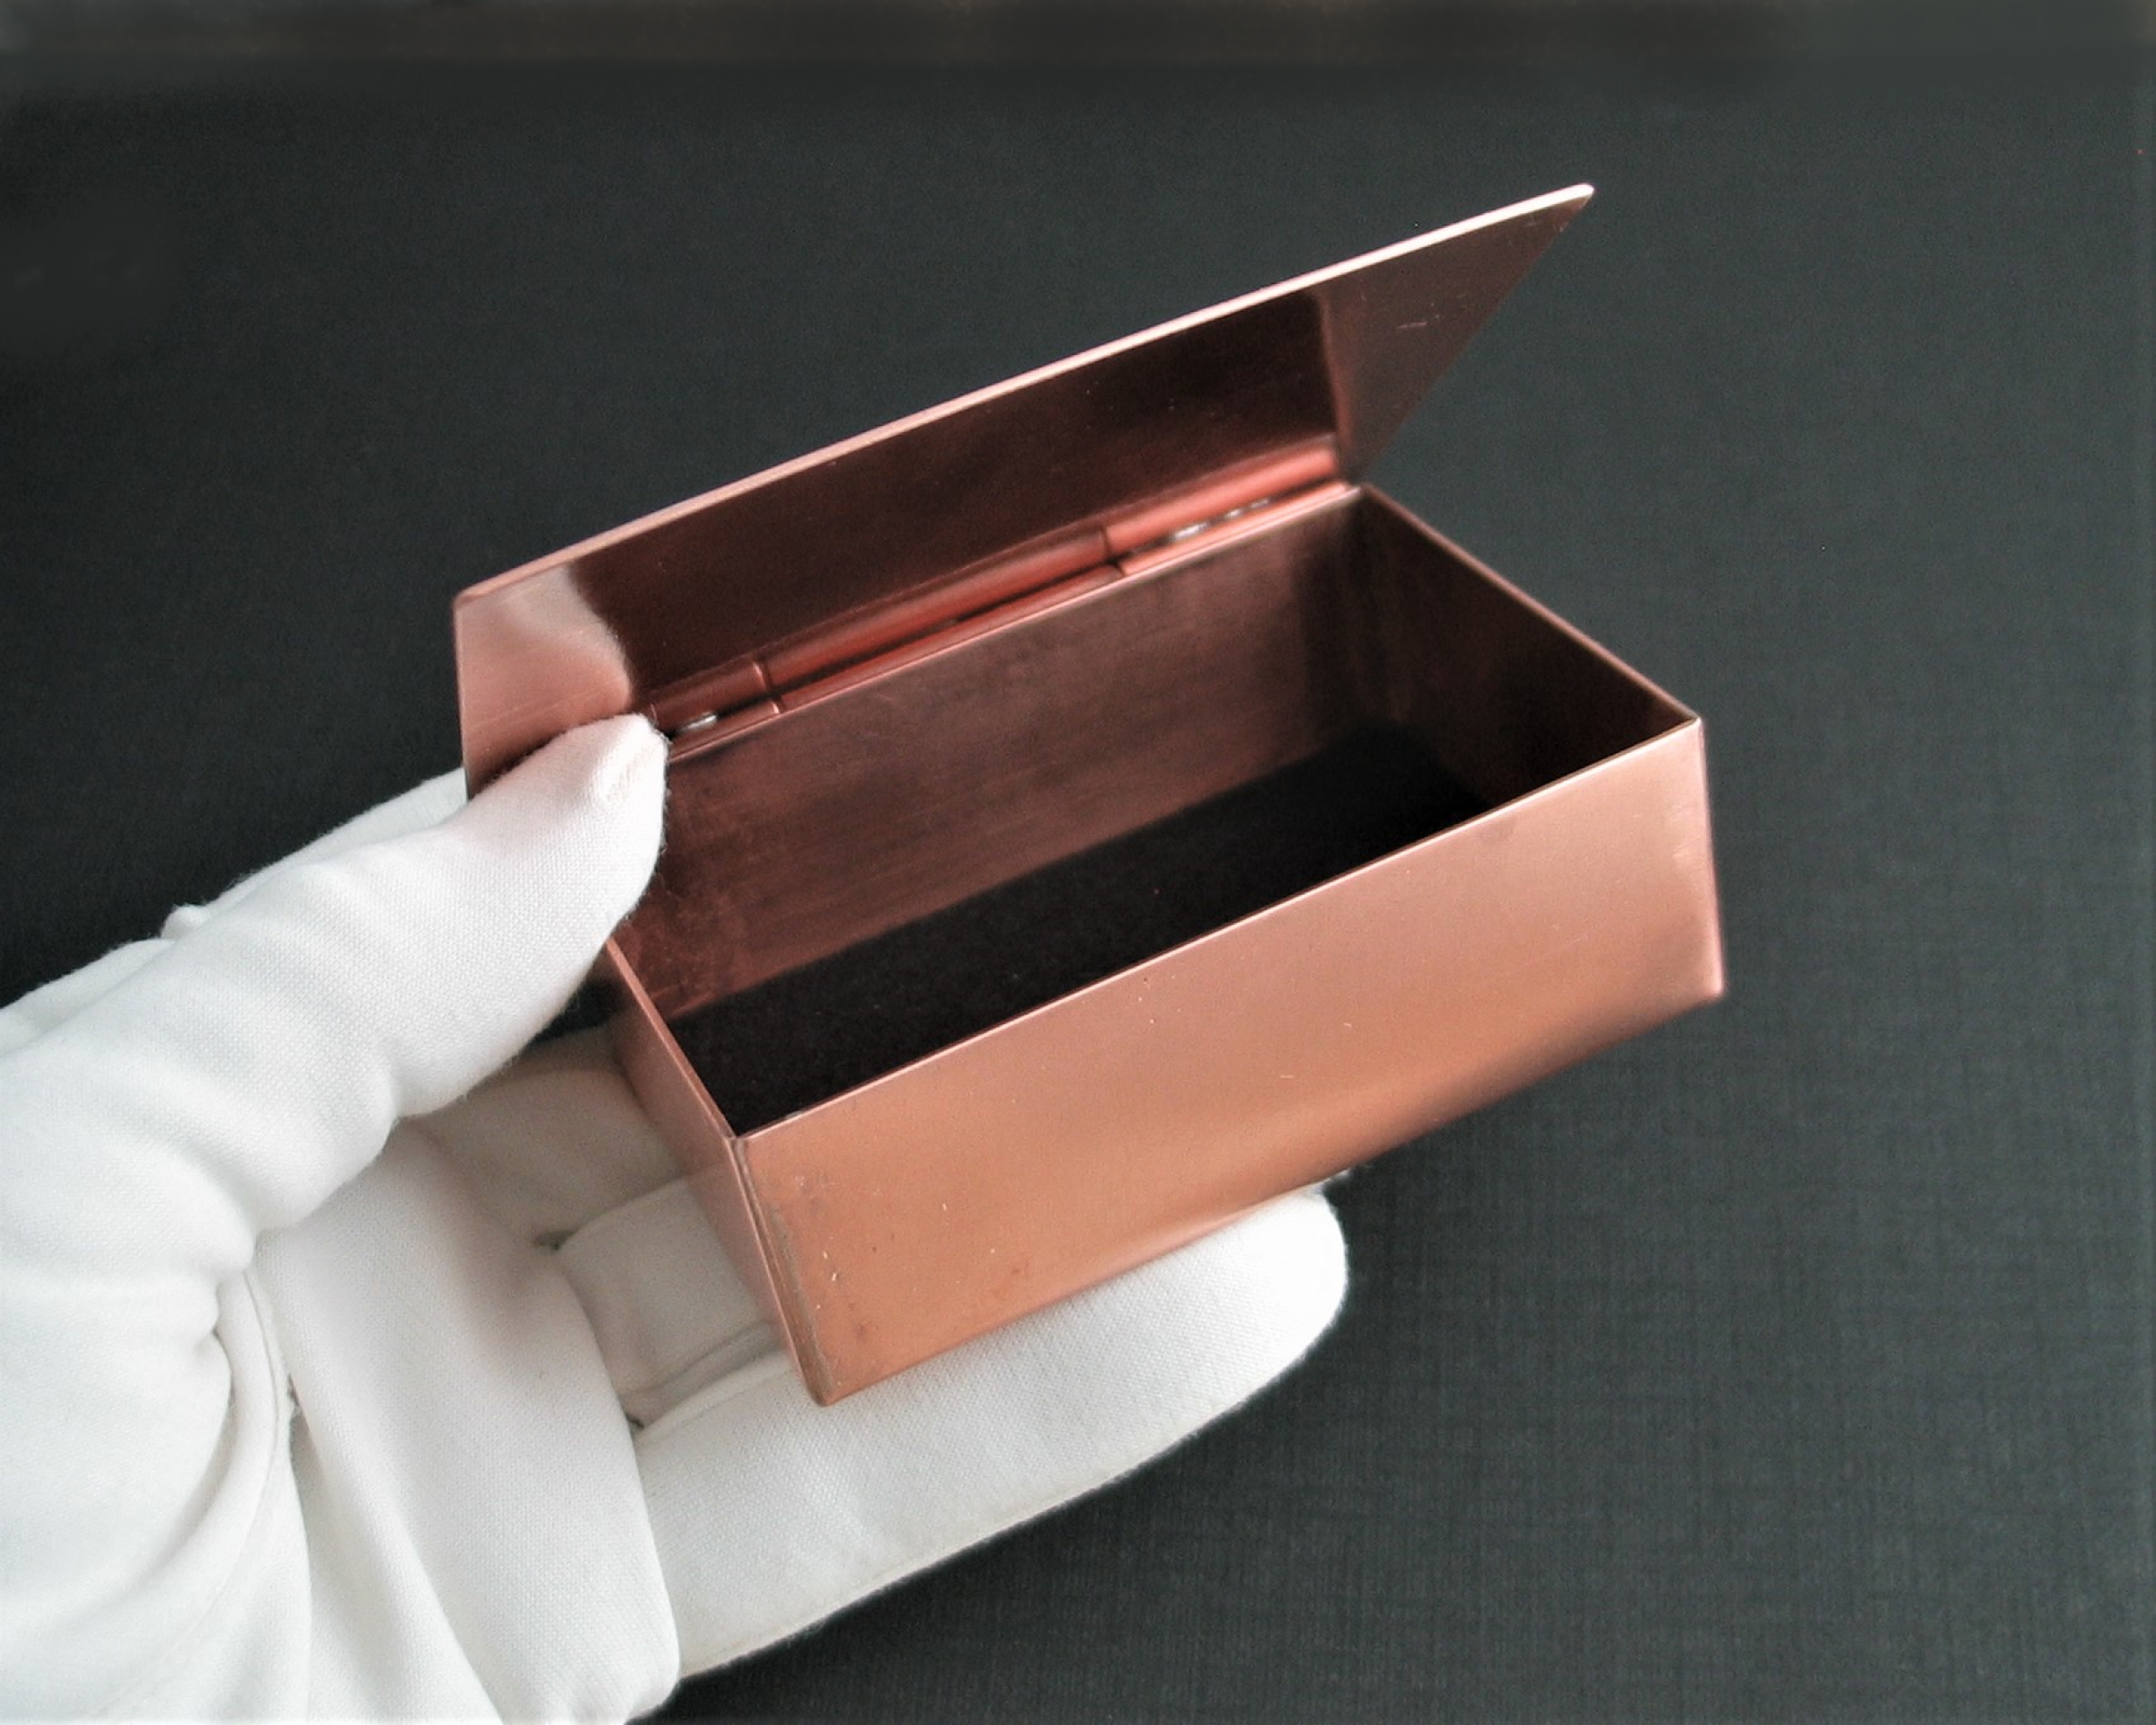 Inside of solid copper trinket box 3" x 2" with enameled lid with silhouettes of trees and running wolves